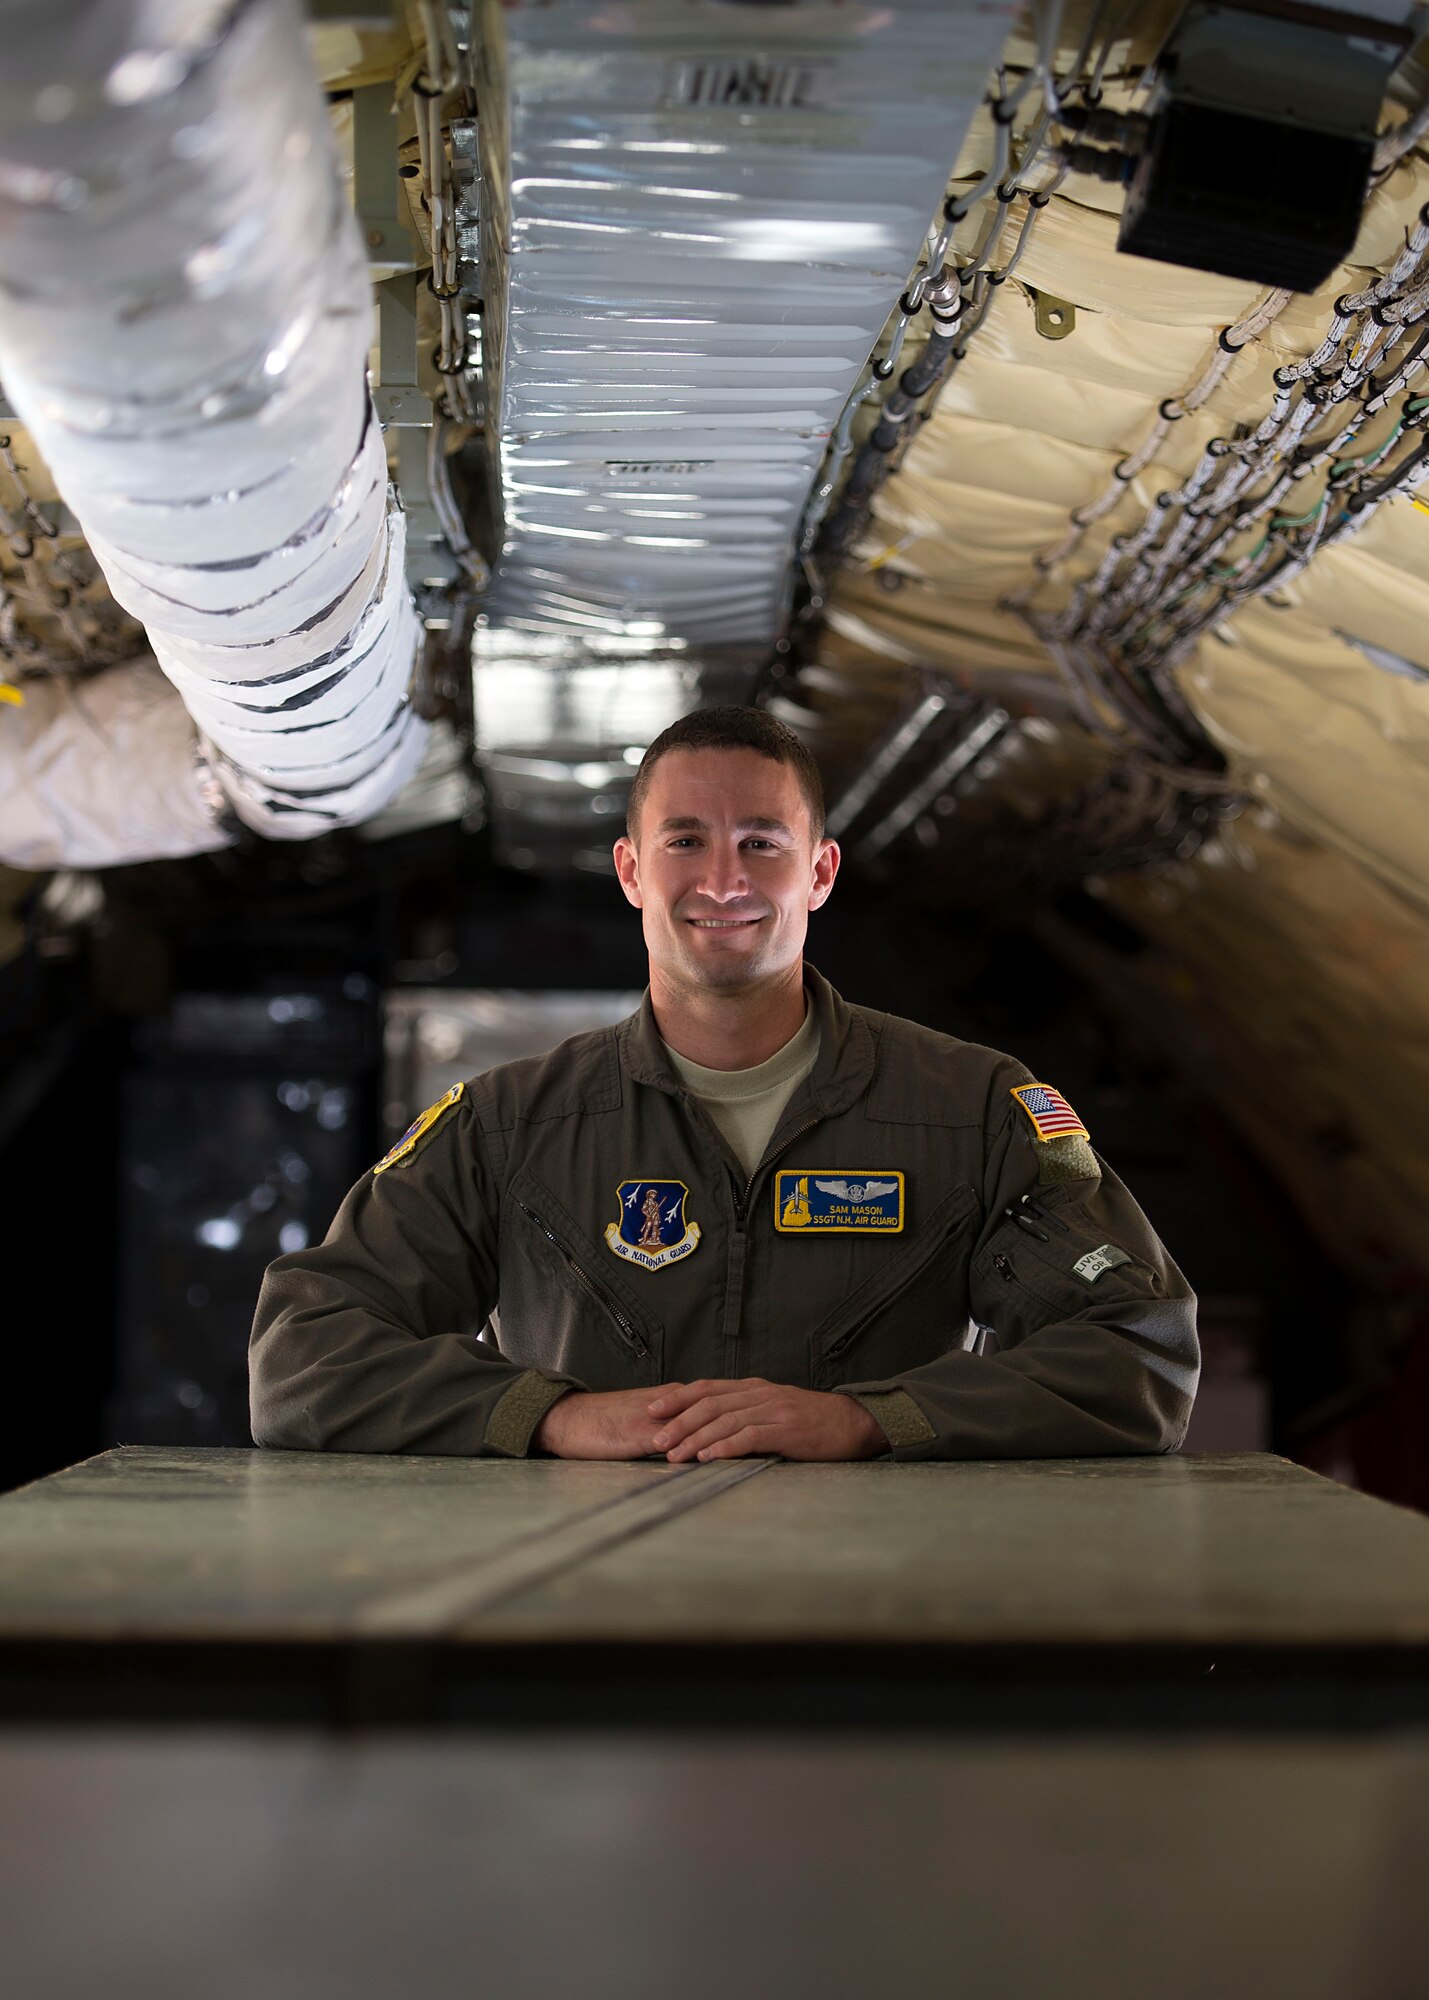 Staff Sgt. Sam J. Mason, a boom operator with the 157th Operations Group, poses for a portrait in a K-C 135 Stratotanker June 13, 2018 at Pease Air National Guard Base, N.H. Mason joined the unit in April after previously serving six years in the Air Force Honor Guard in Washington, DC. (N.H. Air National Guard photo by Airman 1st Class Victoria Nelson)